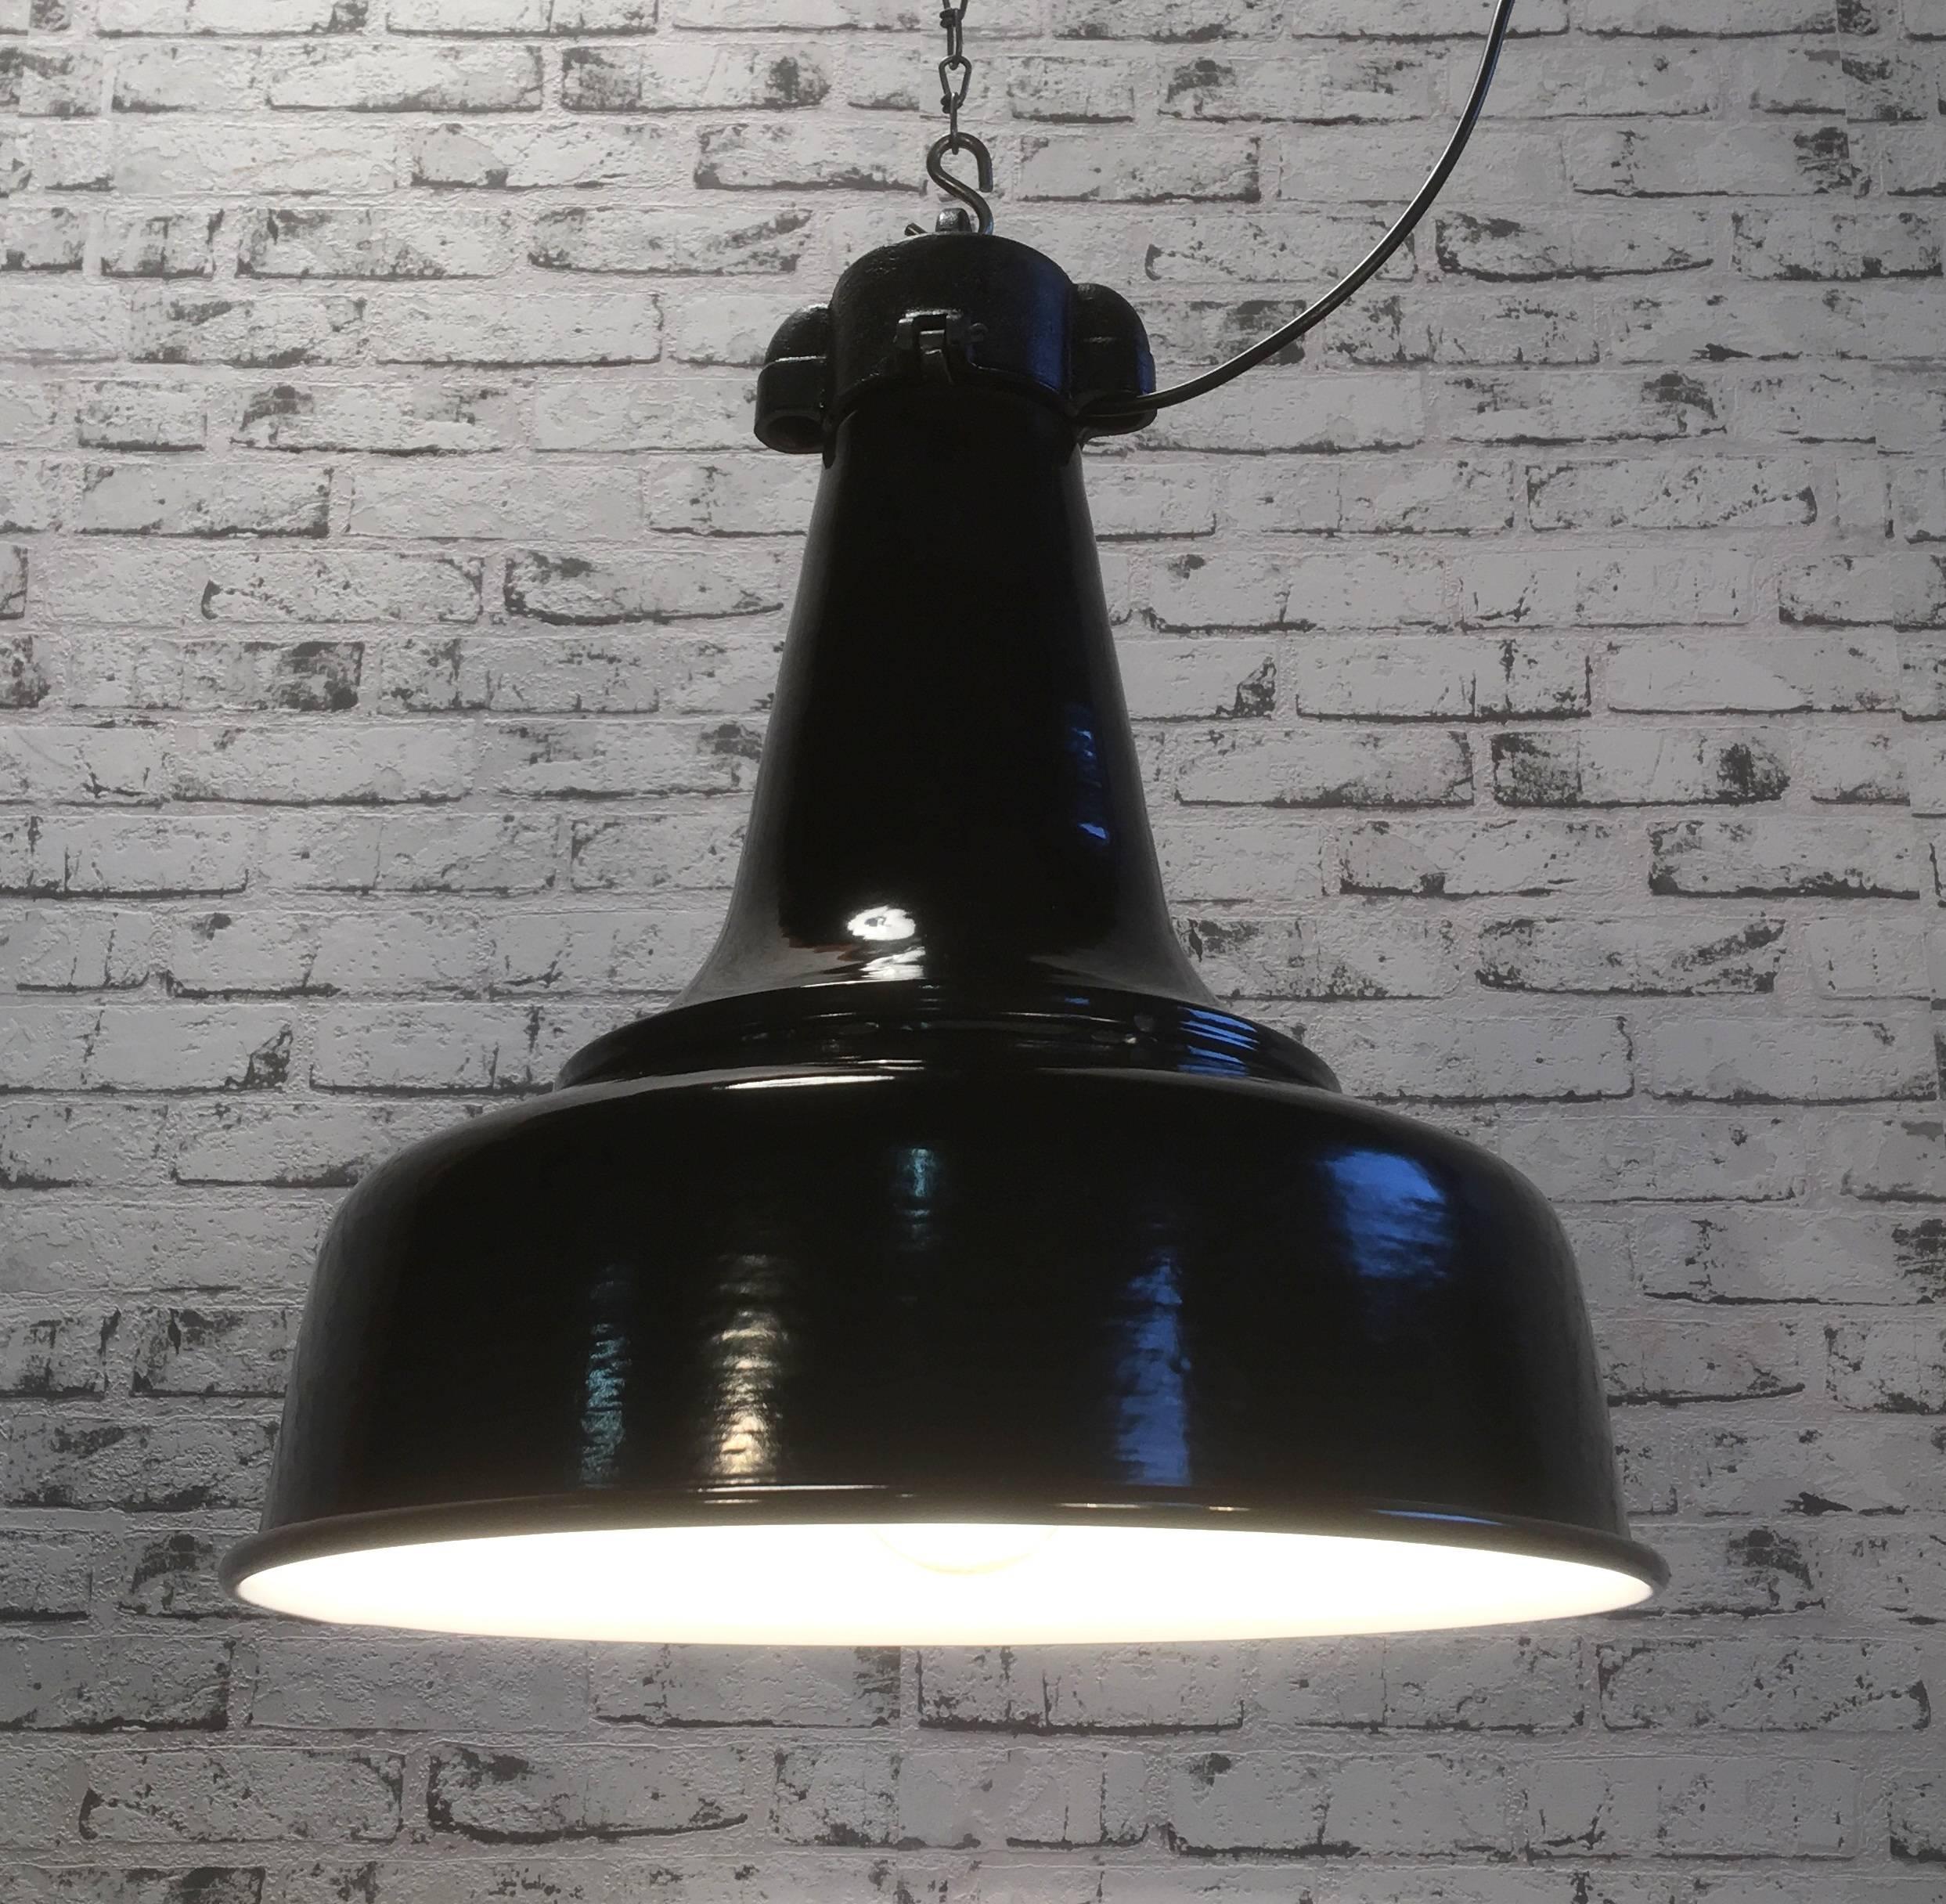 This pendant lamp was used in a factory in former Czechoslovakia in the 1960s,
weight 2kg.